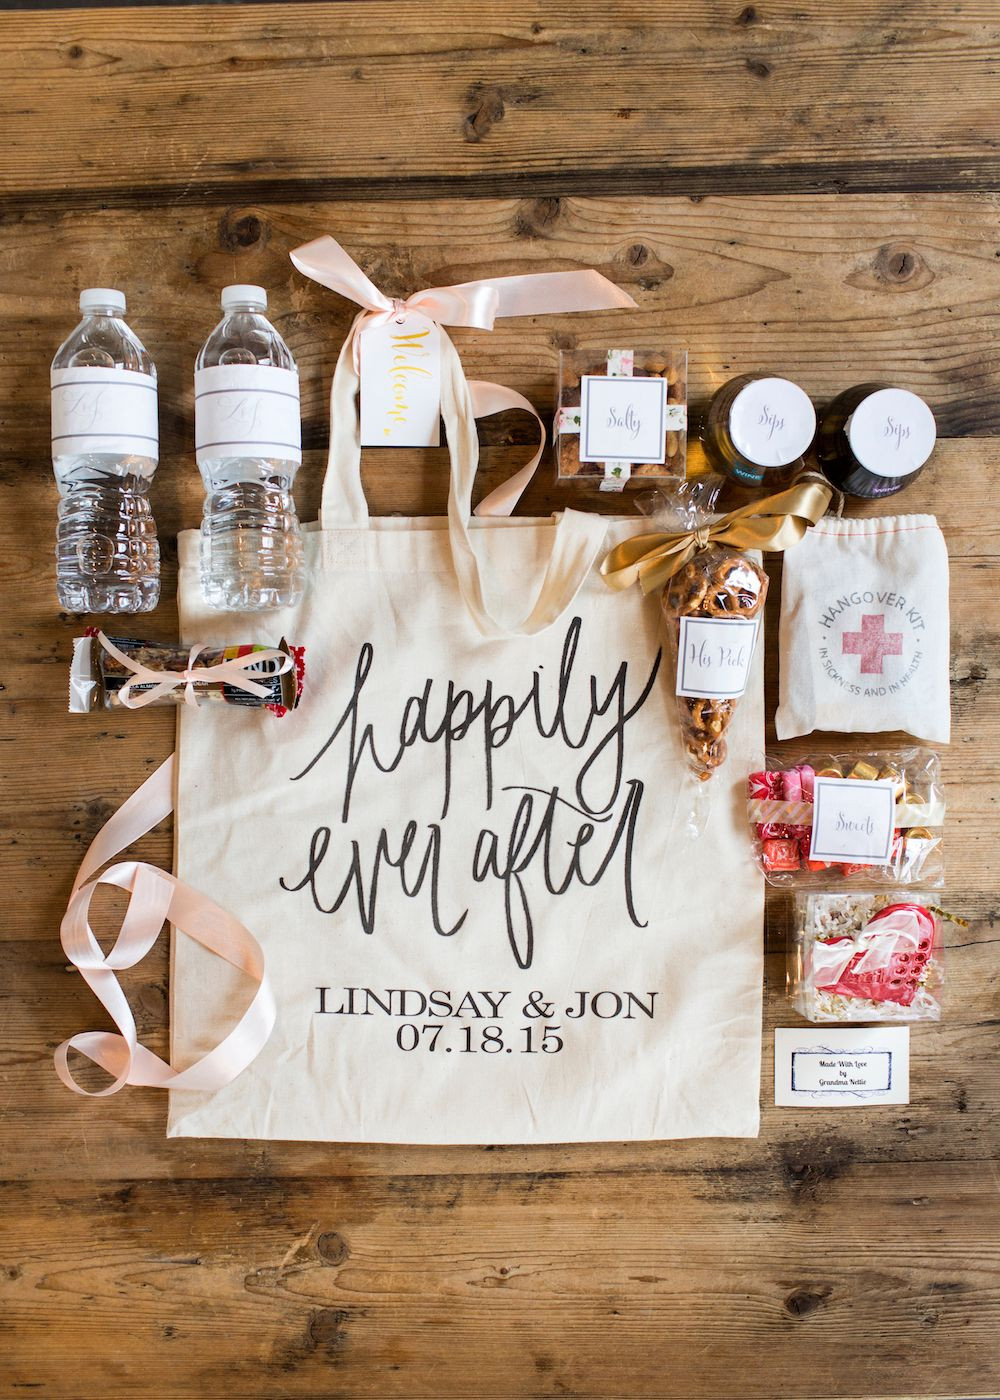 Gift Bags Wedding
 Wedding Wednesday What We Put in Our Wedding Wel e Bags